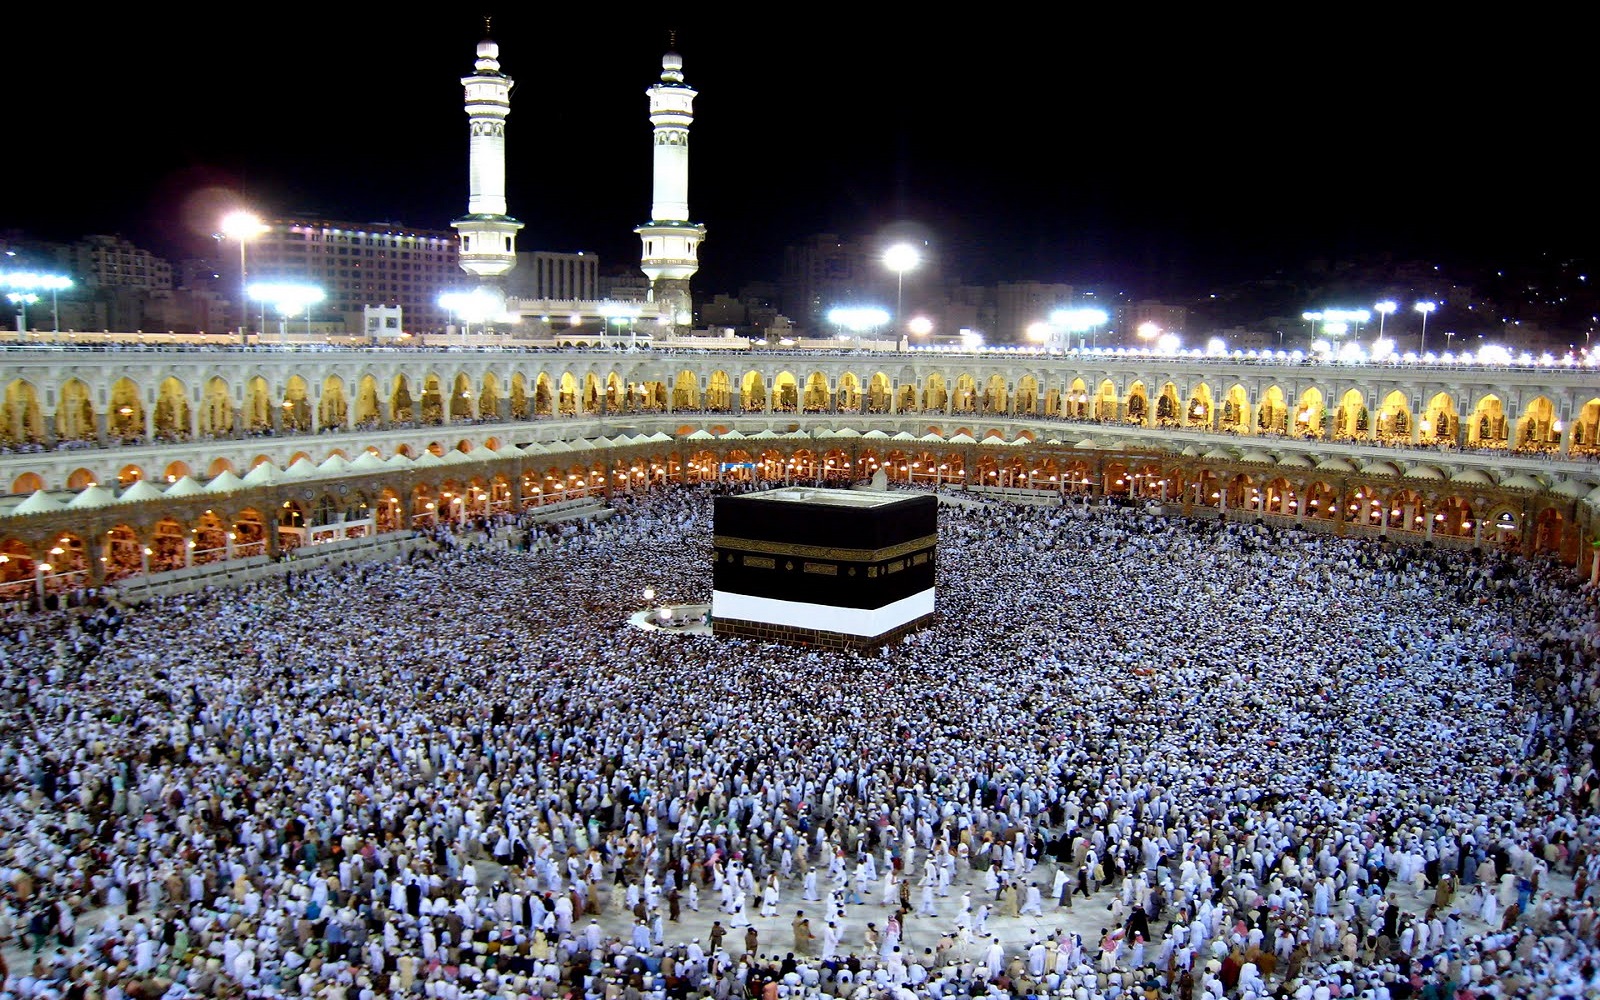 Saudi Arabia Launches Digital Platforms to Give the Entire World a Window to View the Hajj